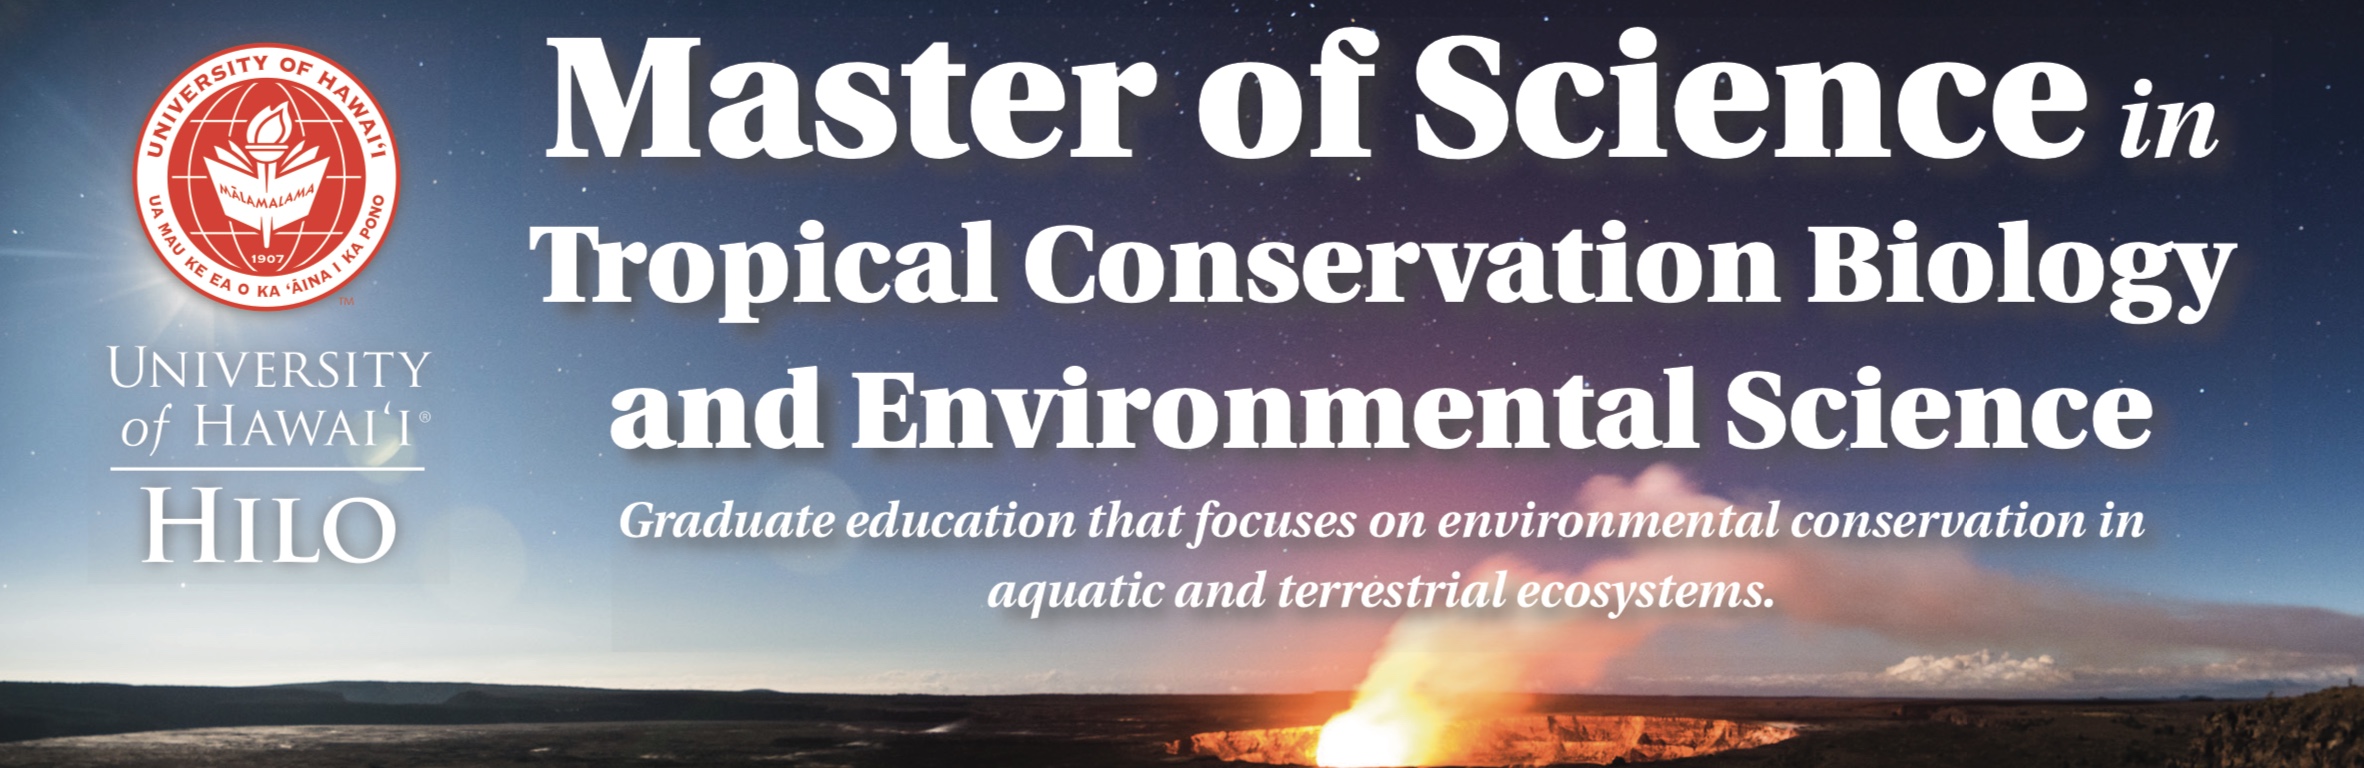 Master of Science in Tropical Conservation Biology and Environmental Science: Available Tracks. Graduate education that focuses on environmental conservation in aquatic and terrestrial ecosystems